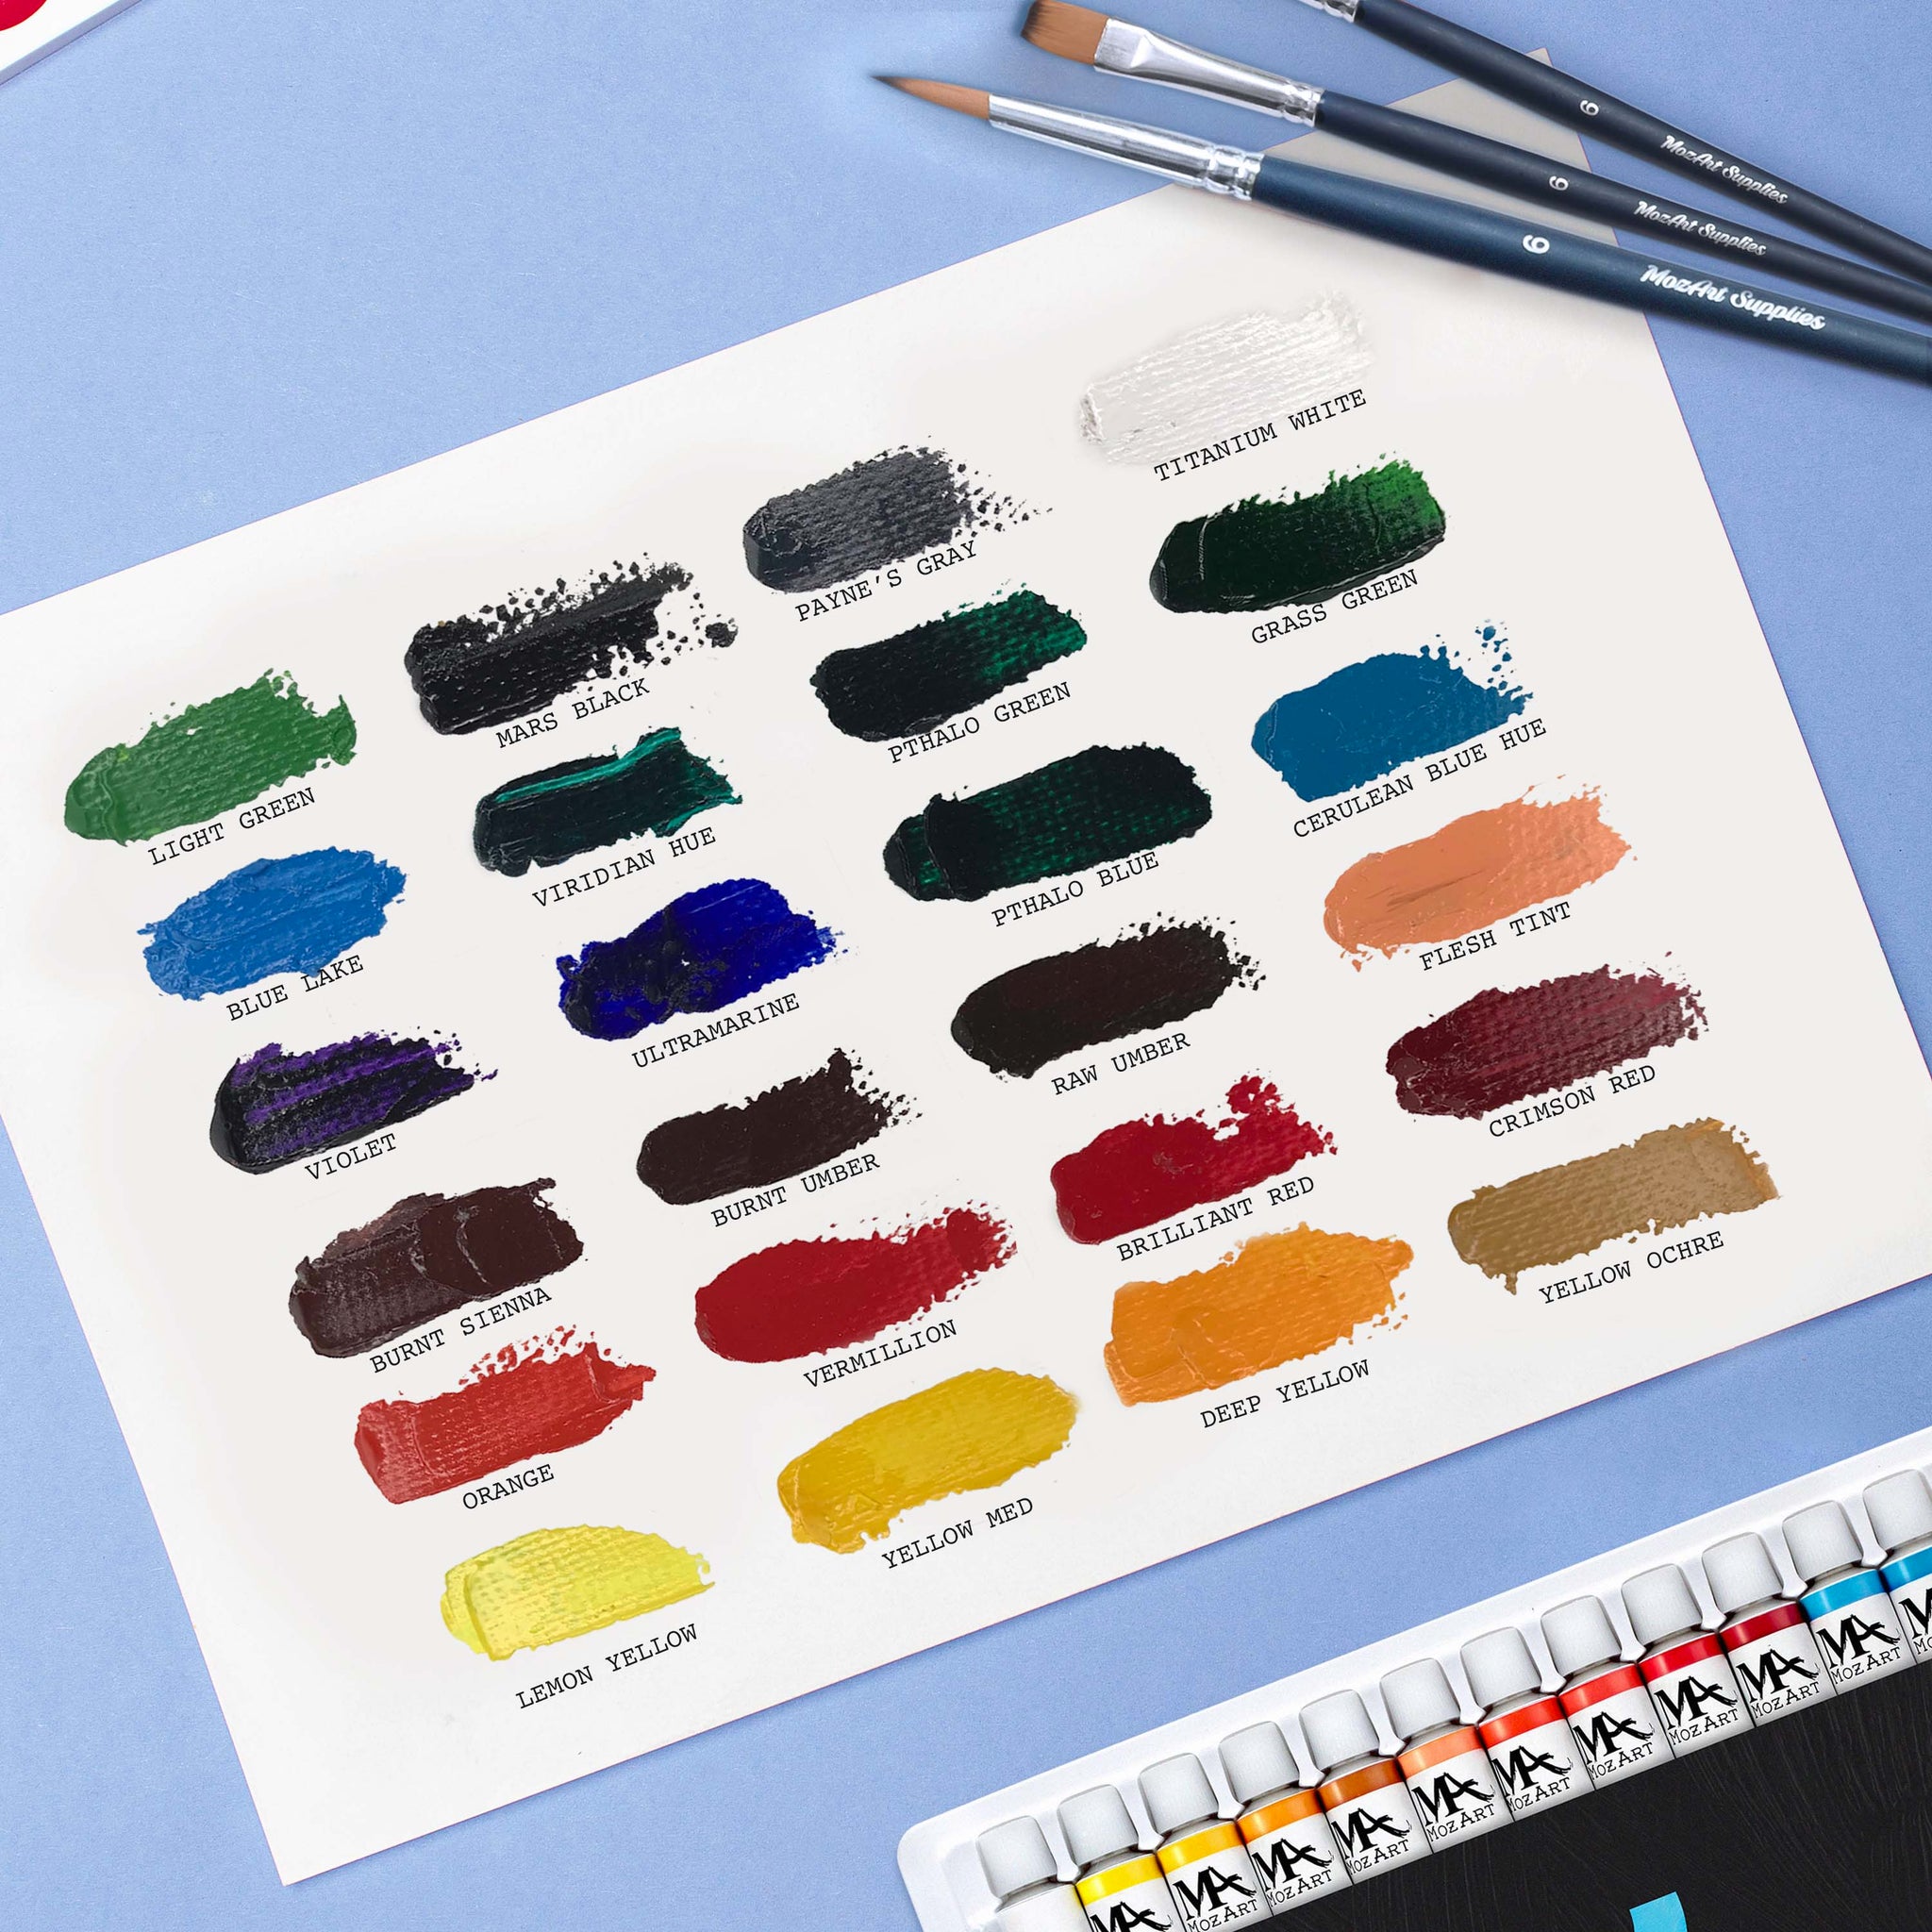 MozArt Watercolor Brushes – 10 Paint Brushes of different sizes